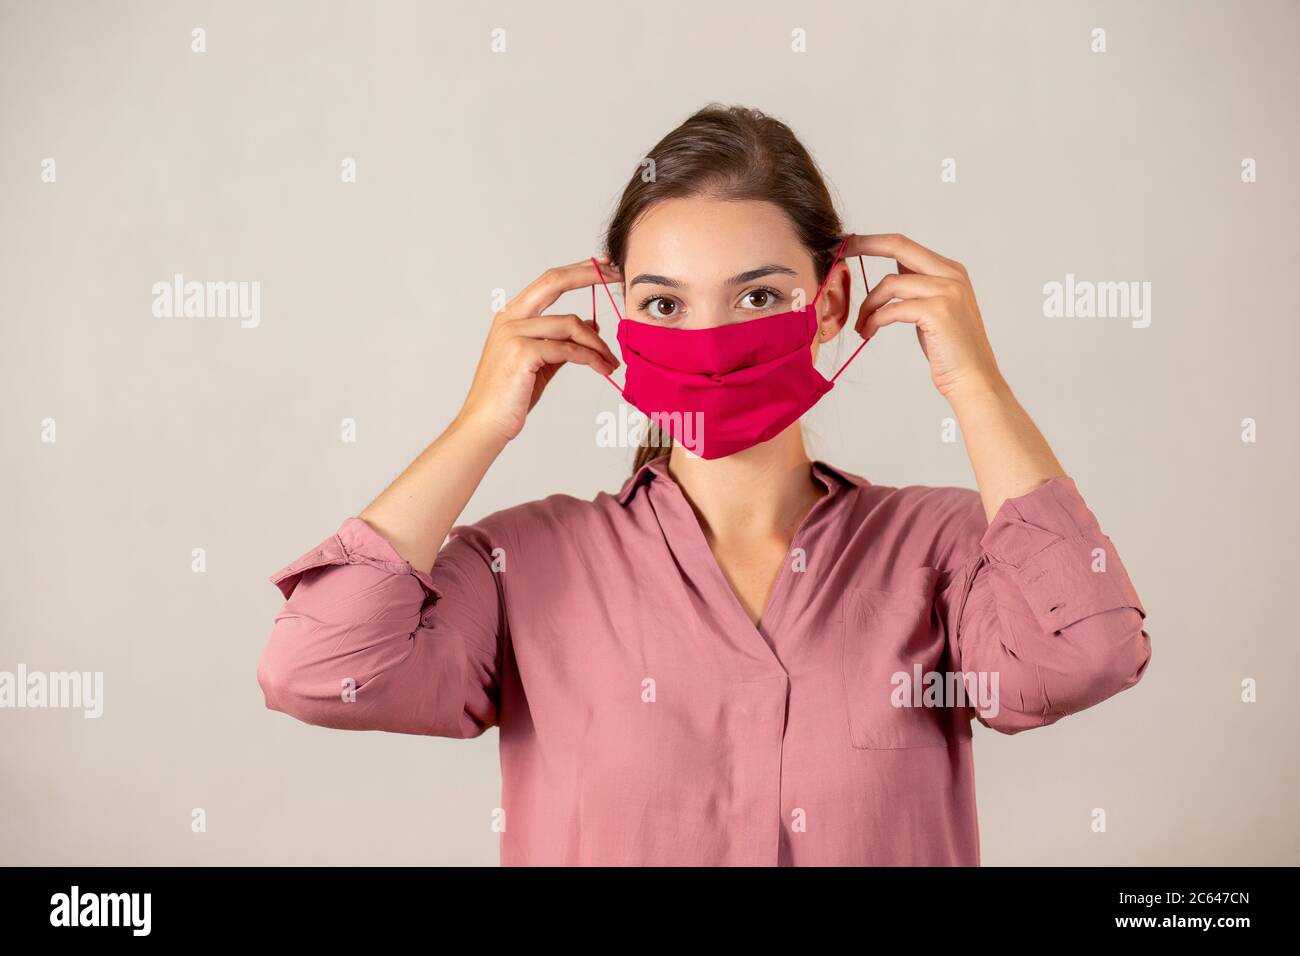 Young girl putting on a protective face mask during a Covid-19 pandemic. Stock Photo